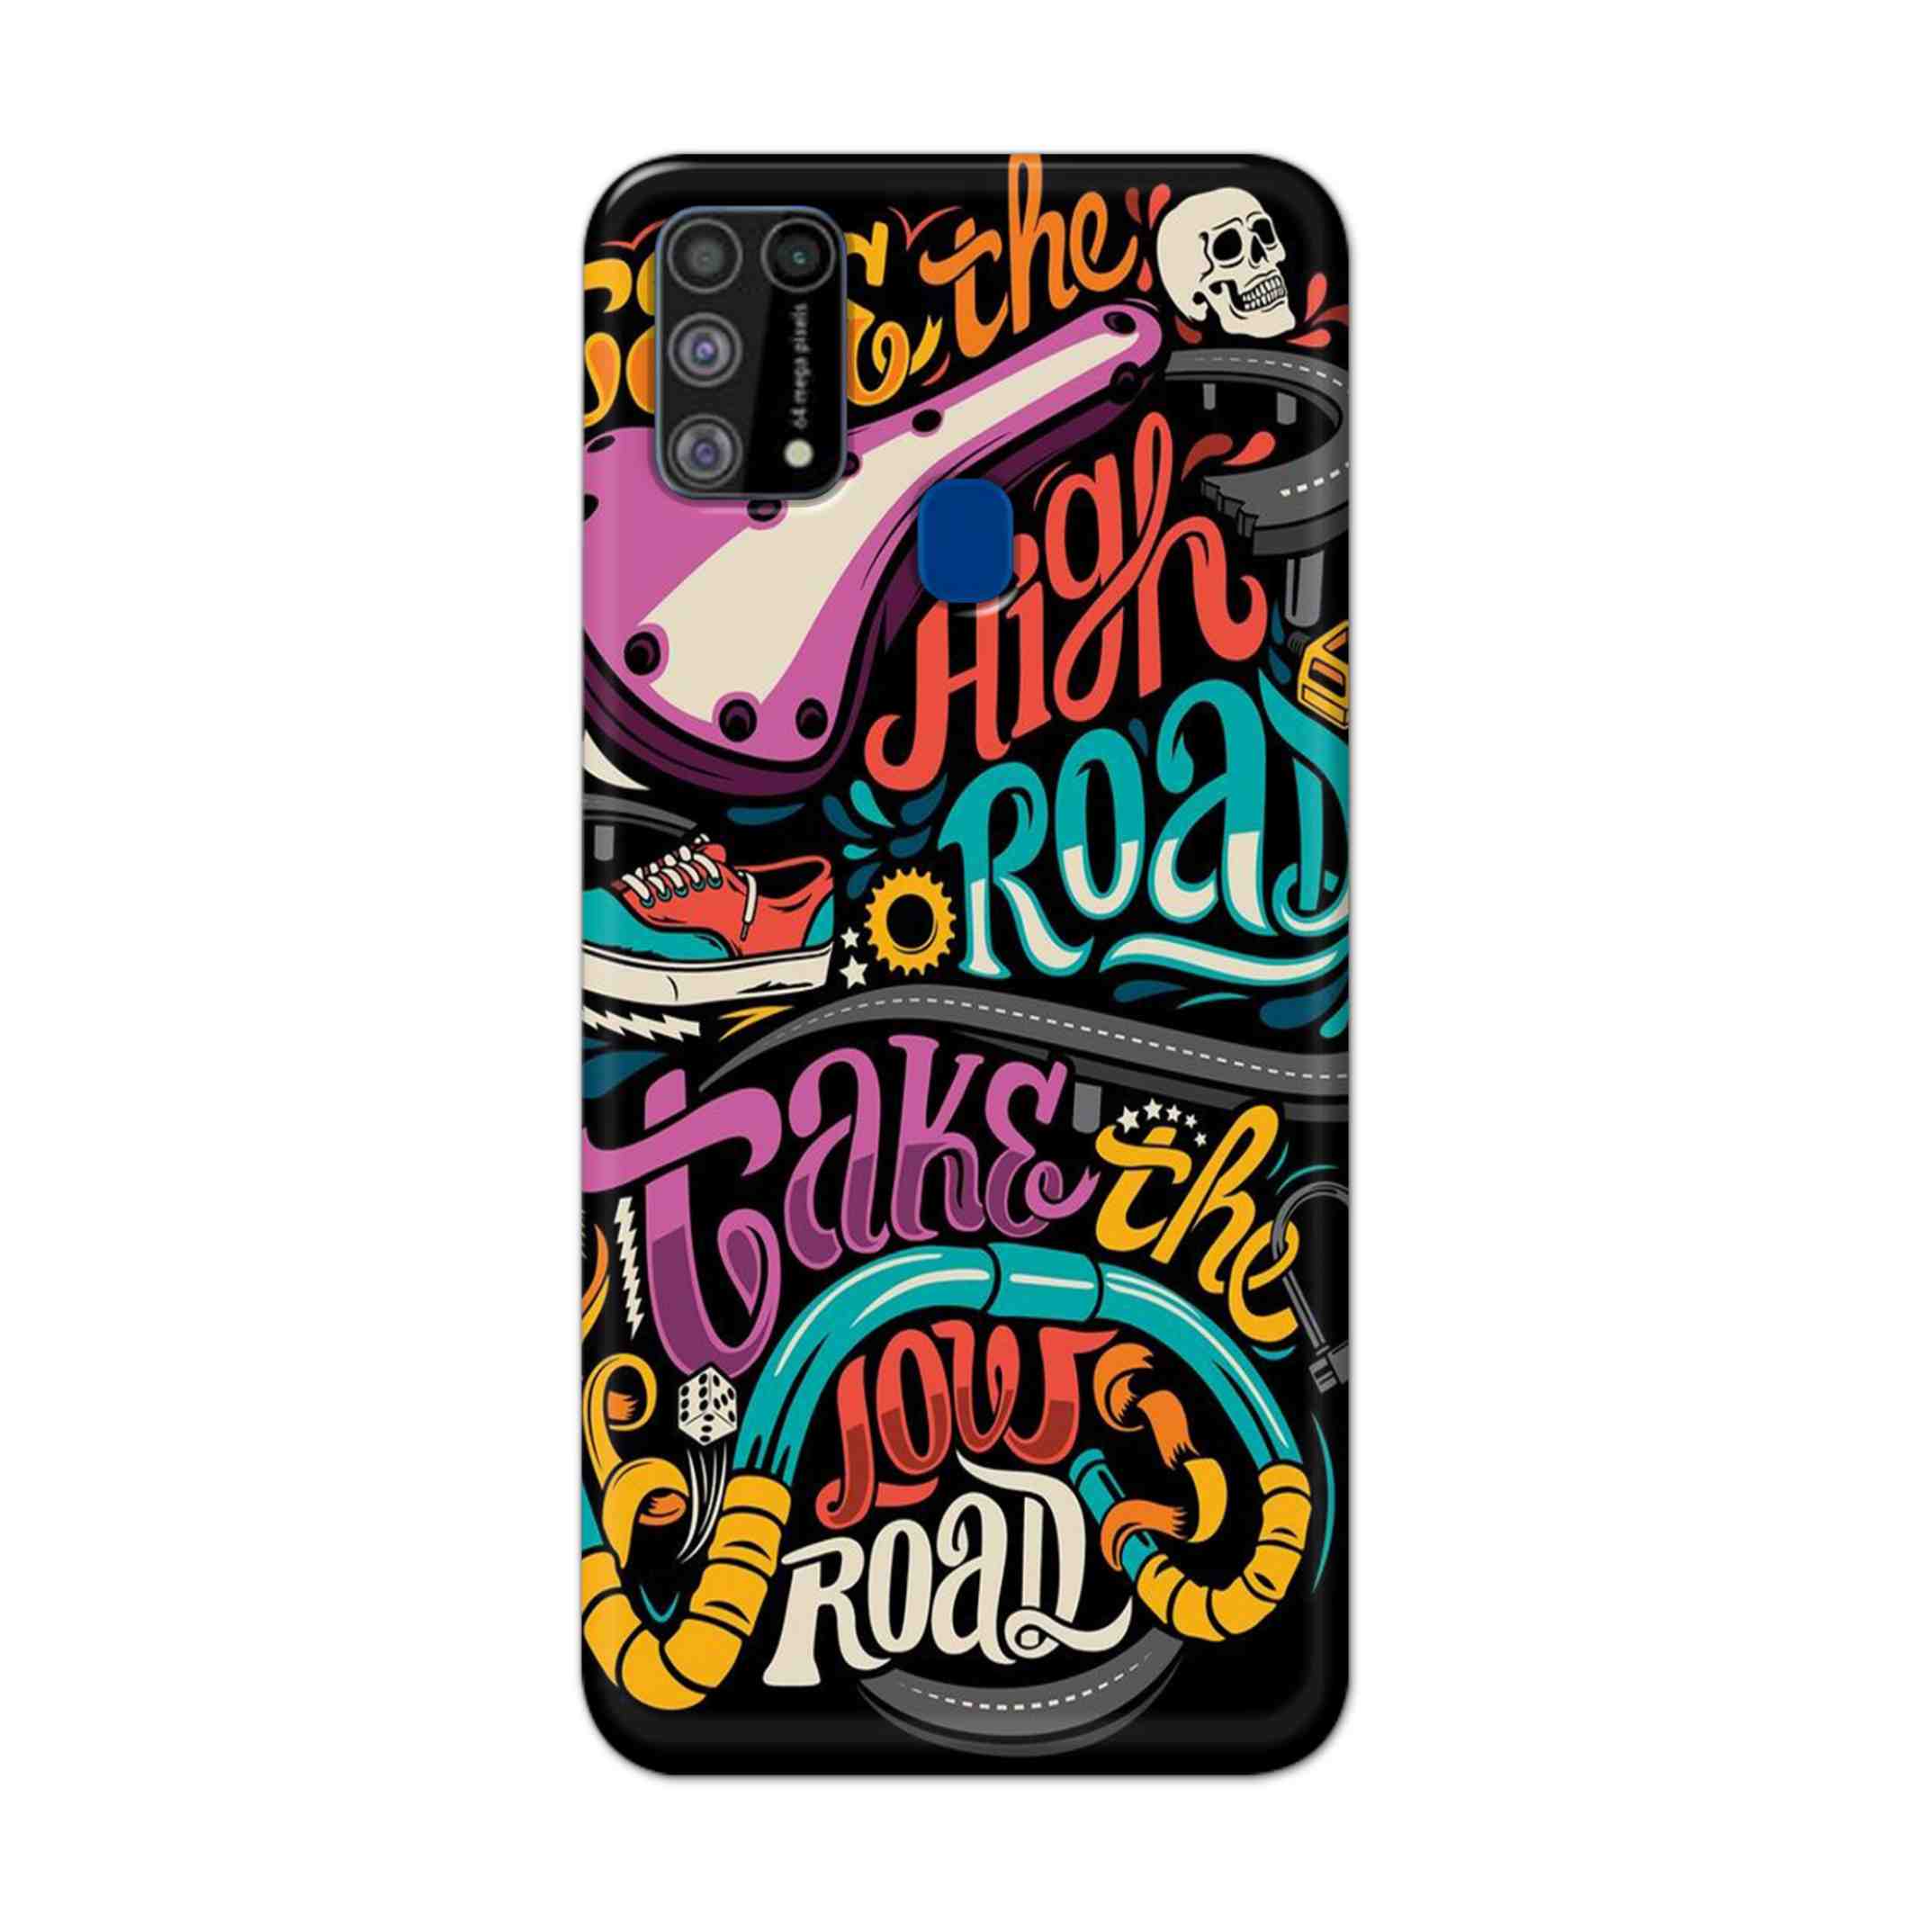 Buy Take The High Road Hard Back Mobile Phone Case Cover For Samsung Galaxy M31 Online